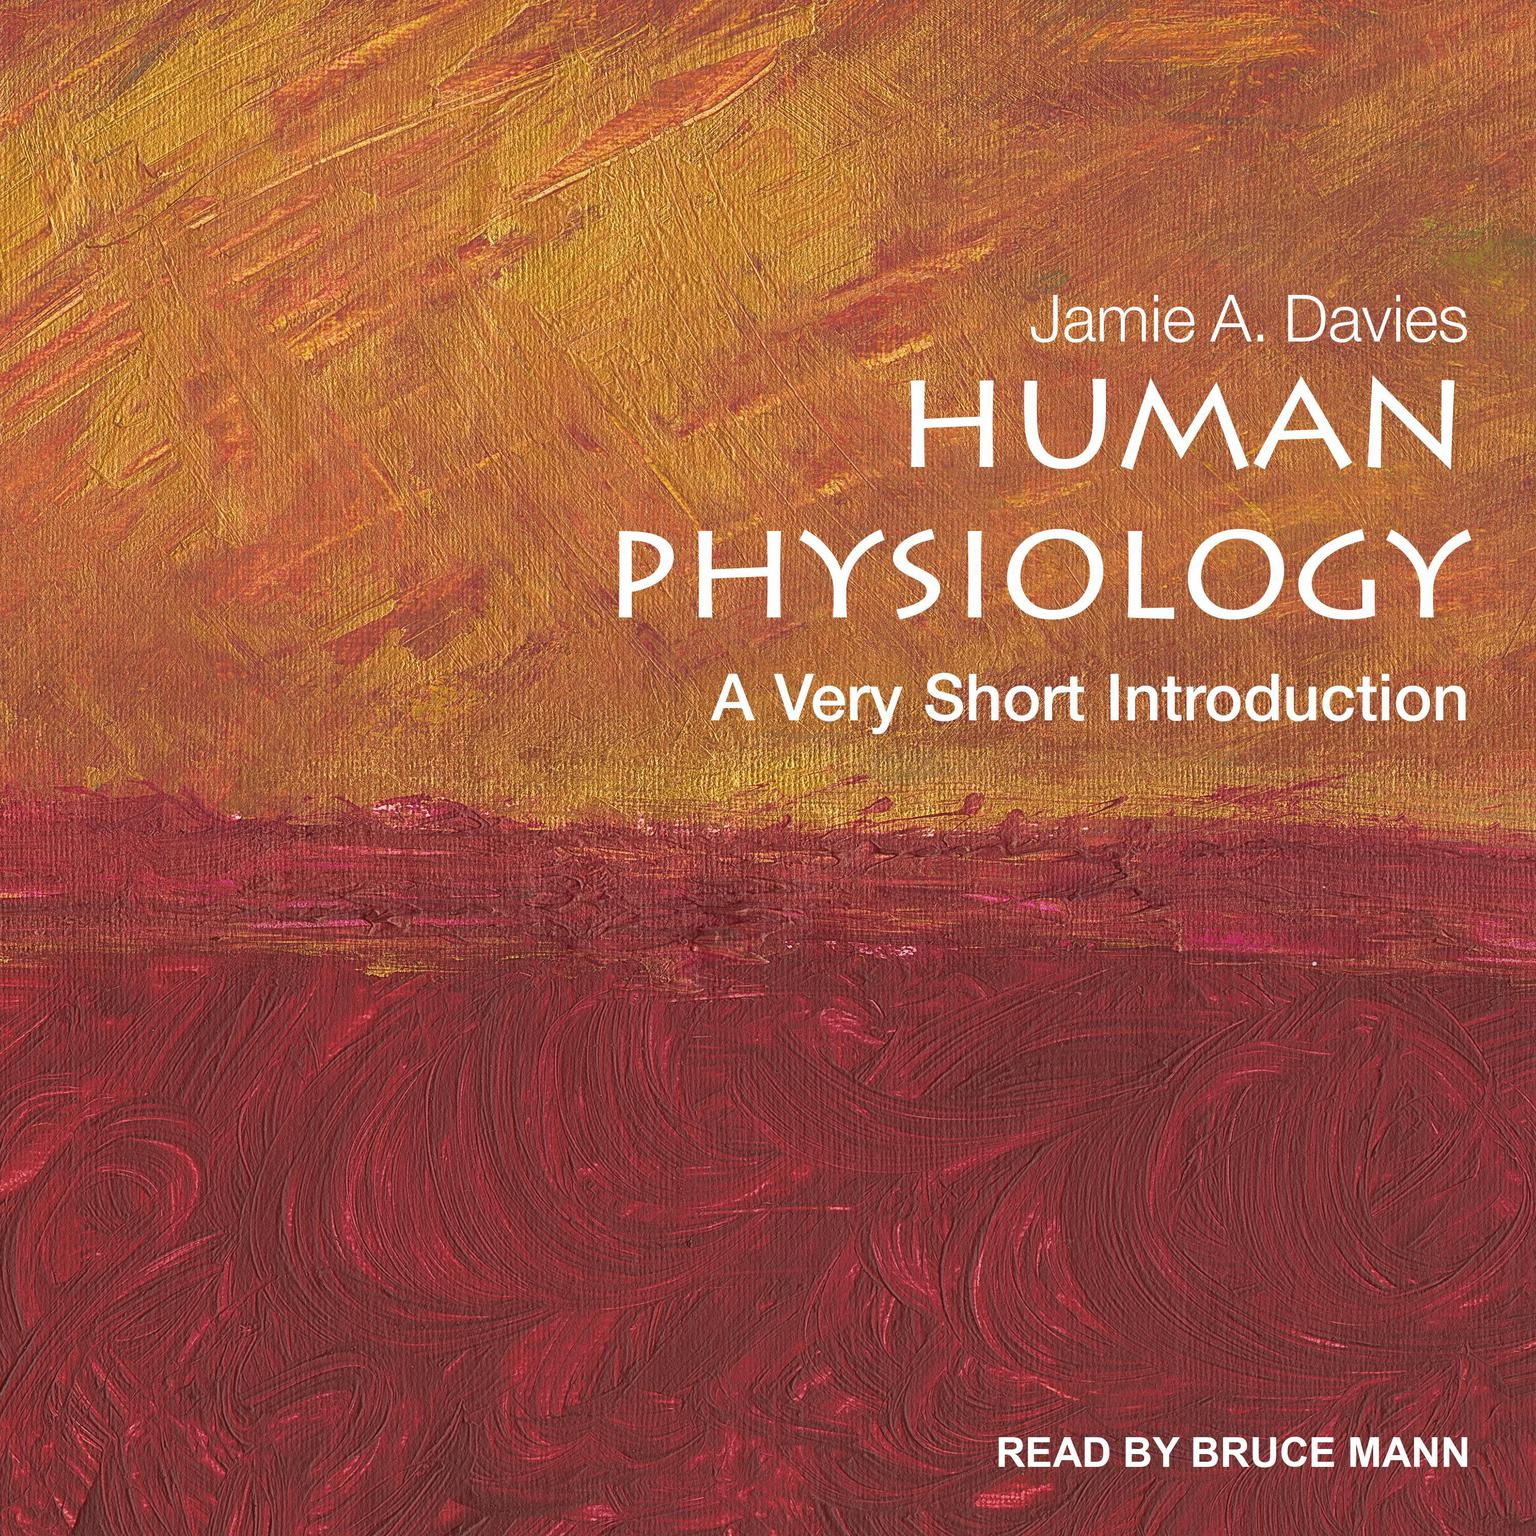 Human Physiology: A Very Short Introduction Audiobook, by Jamie Davies